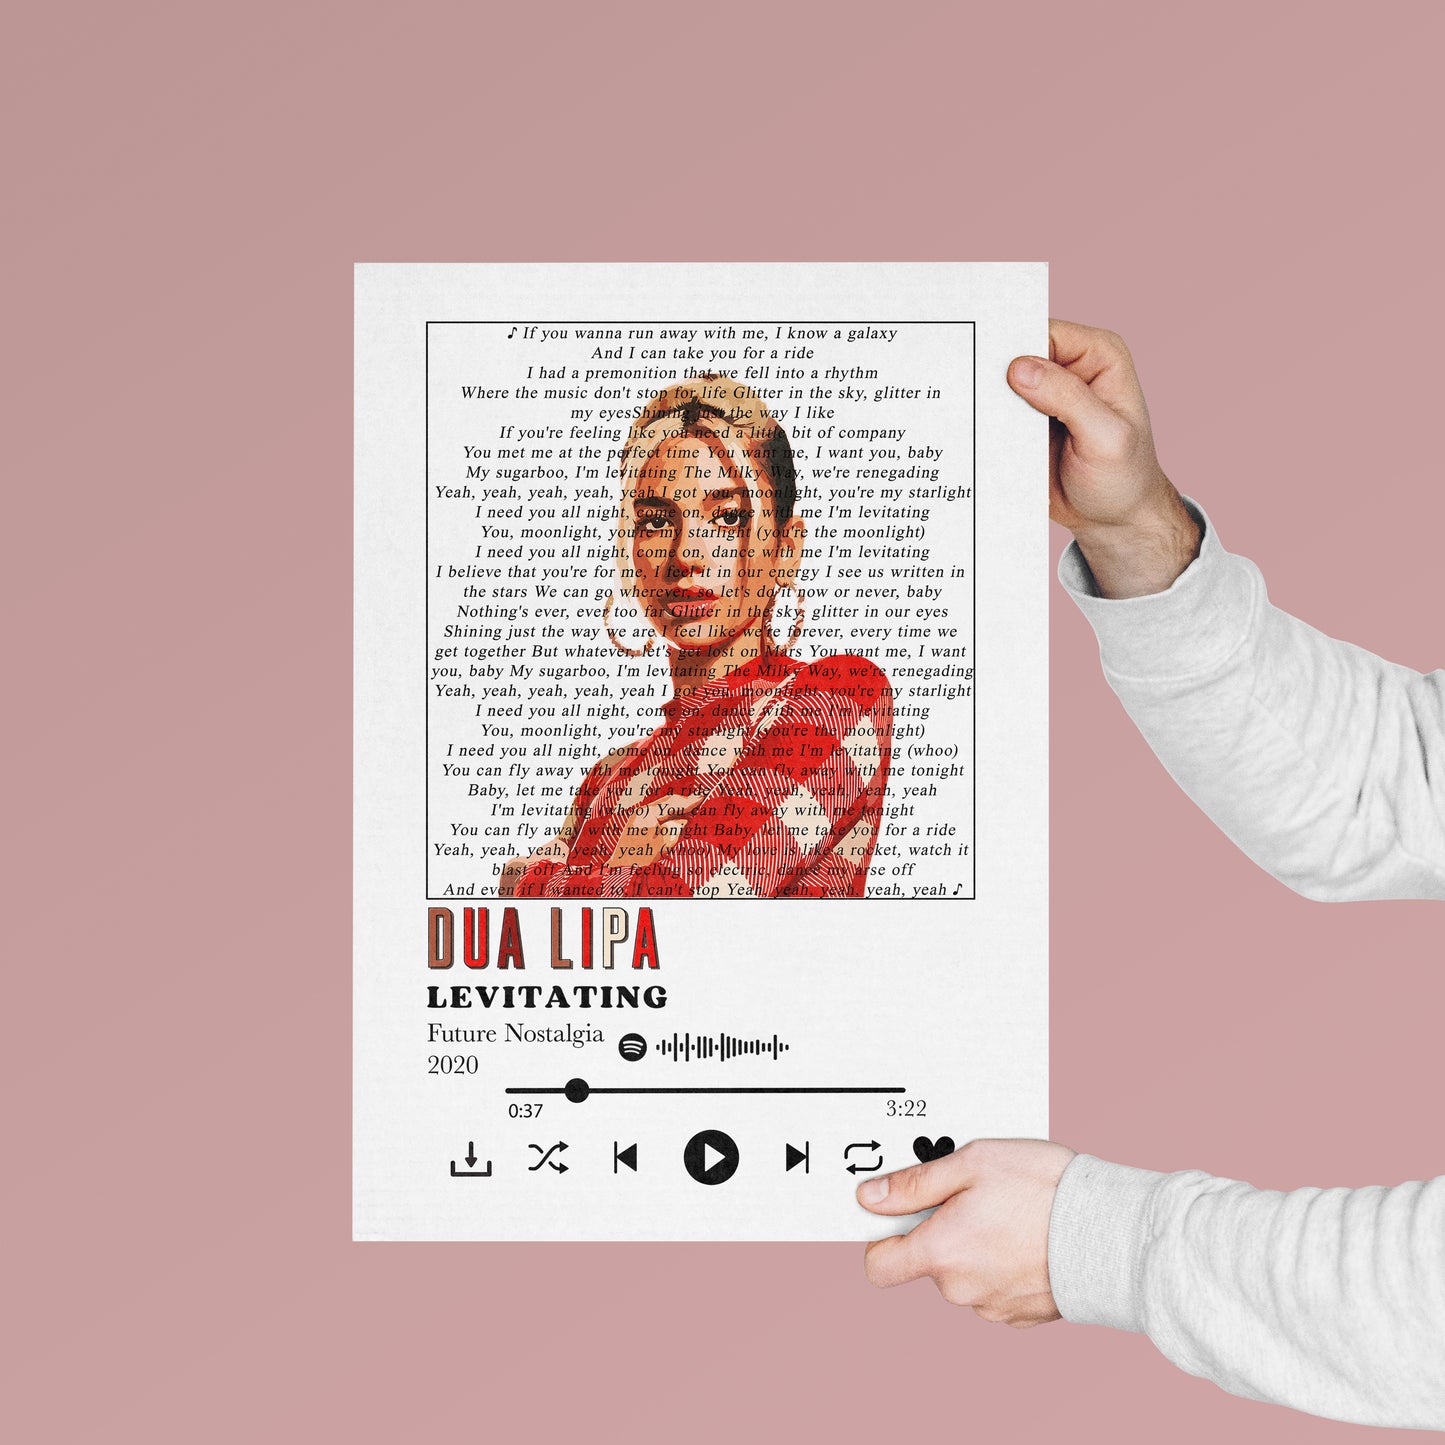 Discover the perfect wall art to express your favorite song, <a rel="noopener" href="https://www.youtube.com/watch?v=WHuBW3qKm9g" target="_blank">Dua Lipa - Levitating</a>&nbsp;Lyrics Prints. Our free song lyrics print come in elegant colorful designs, artwork from song lyrics, personalized lyrics to print, and more, with hundred